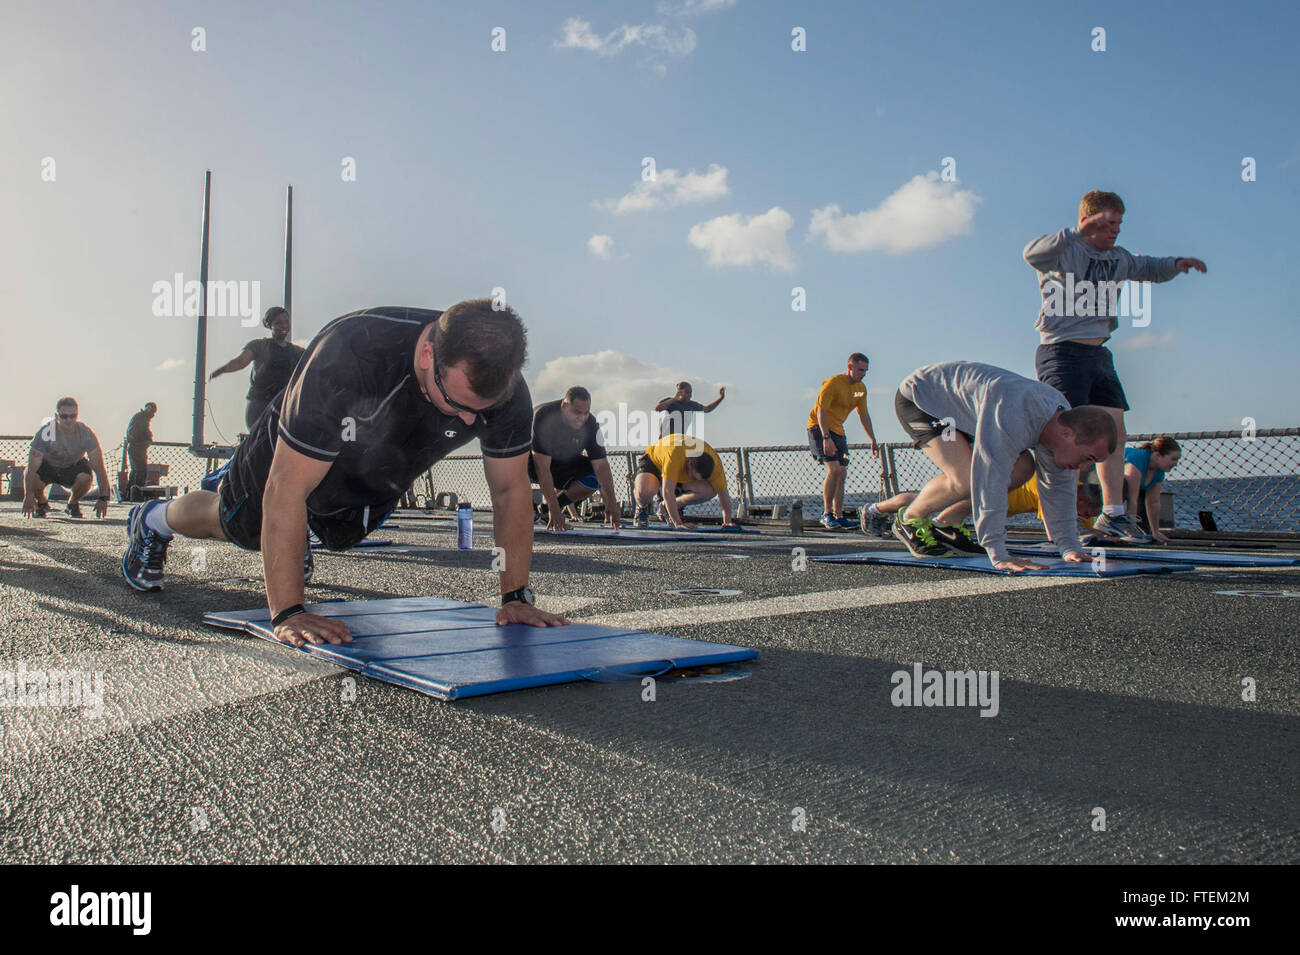 ATLANTIC OCEAN (Feb. 19, 2015) Sailors aboard USS Laboon (DDG 58) perform “burpees” during command physical training on the flight deck Feb. 19, 2015.  Laboon, an Arleigh Burke-class guided-missile destroyer home ported in Norfolk, is underway conducting naval operations in the U.S. 6th Fleet area of operations in support of U.S. national security interests in Europe. Stock Photo